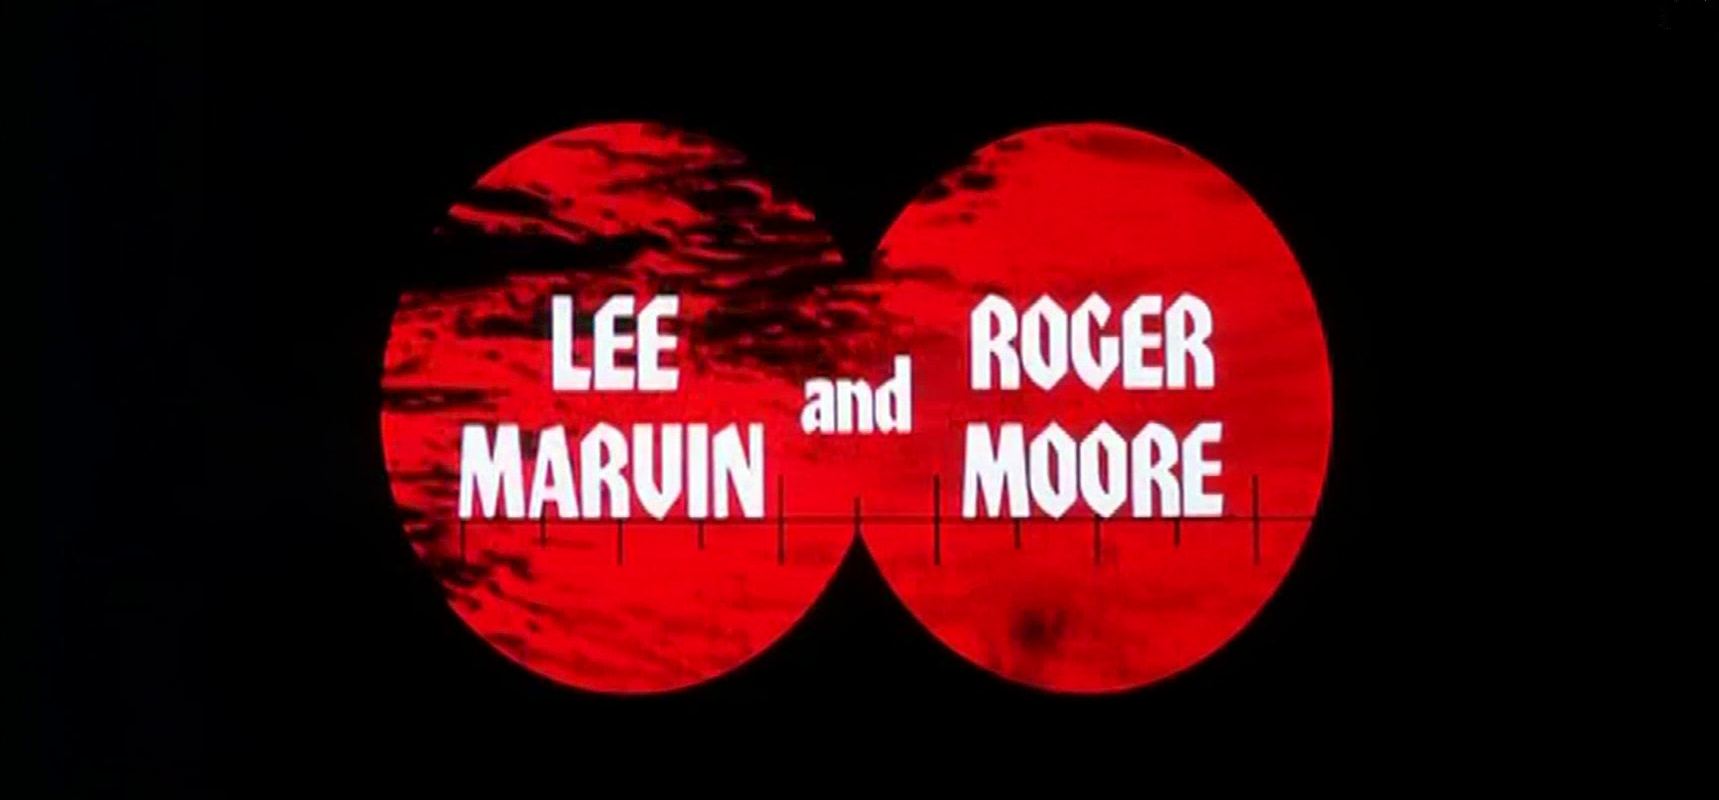 Main title from Shout at the Devil (1976) (5). Lee Marvin and Roger Moore